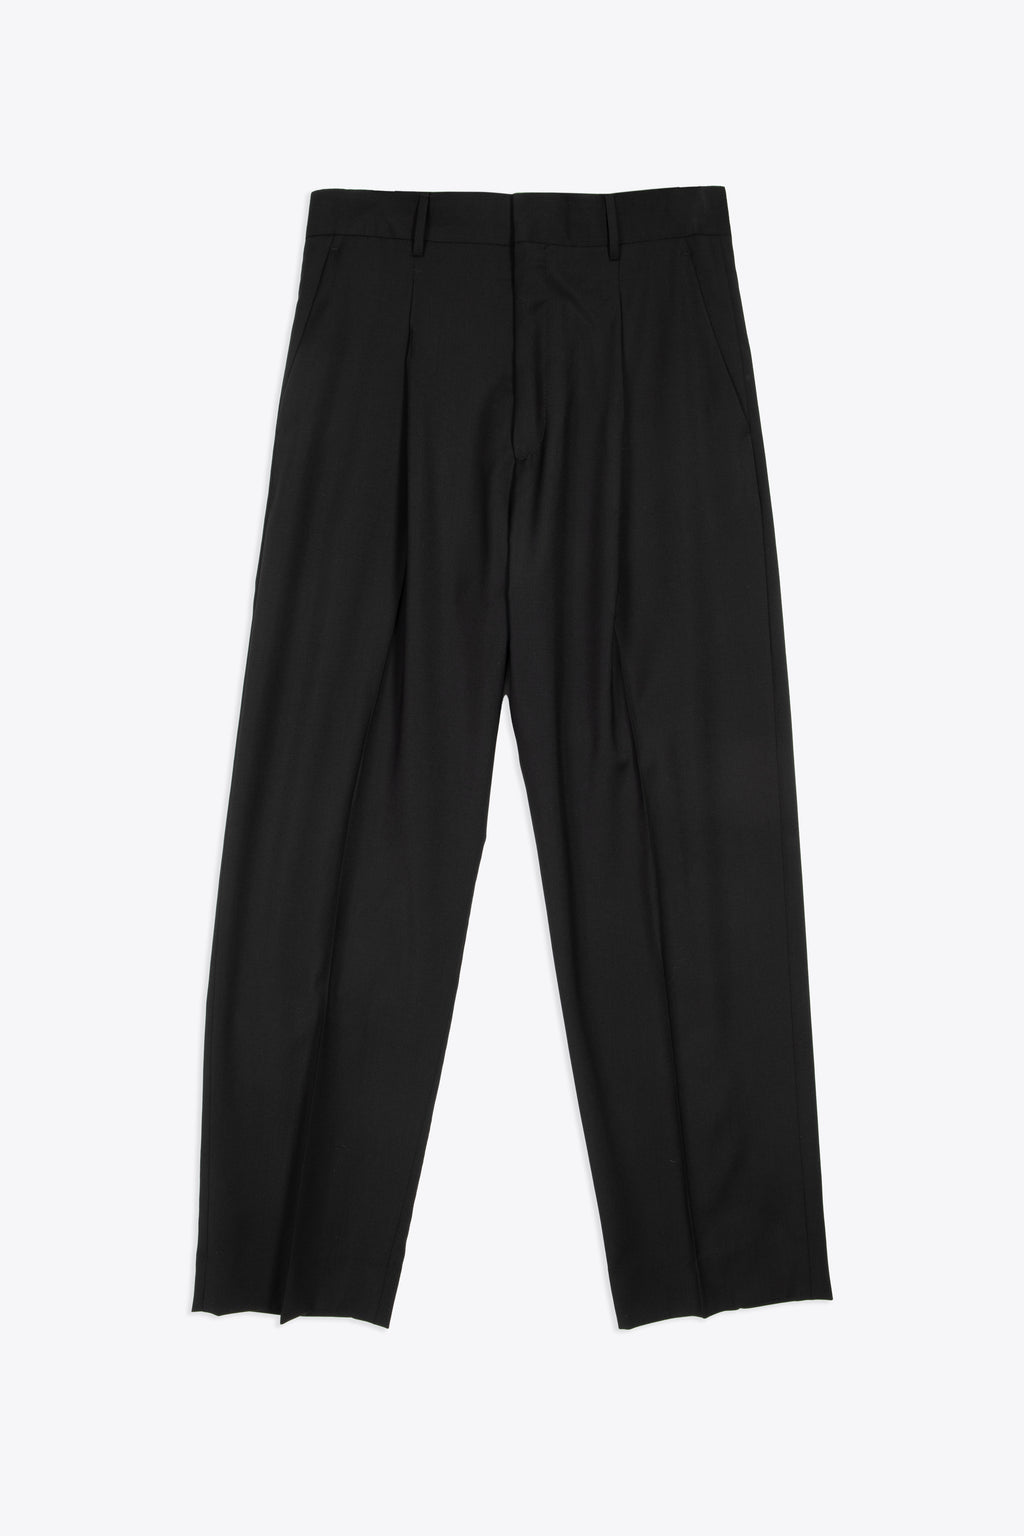 alt-image__Black-wool-tailored-pant-with-front-pleat---Vincent-Timisoara-Trousers-